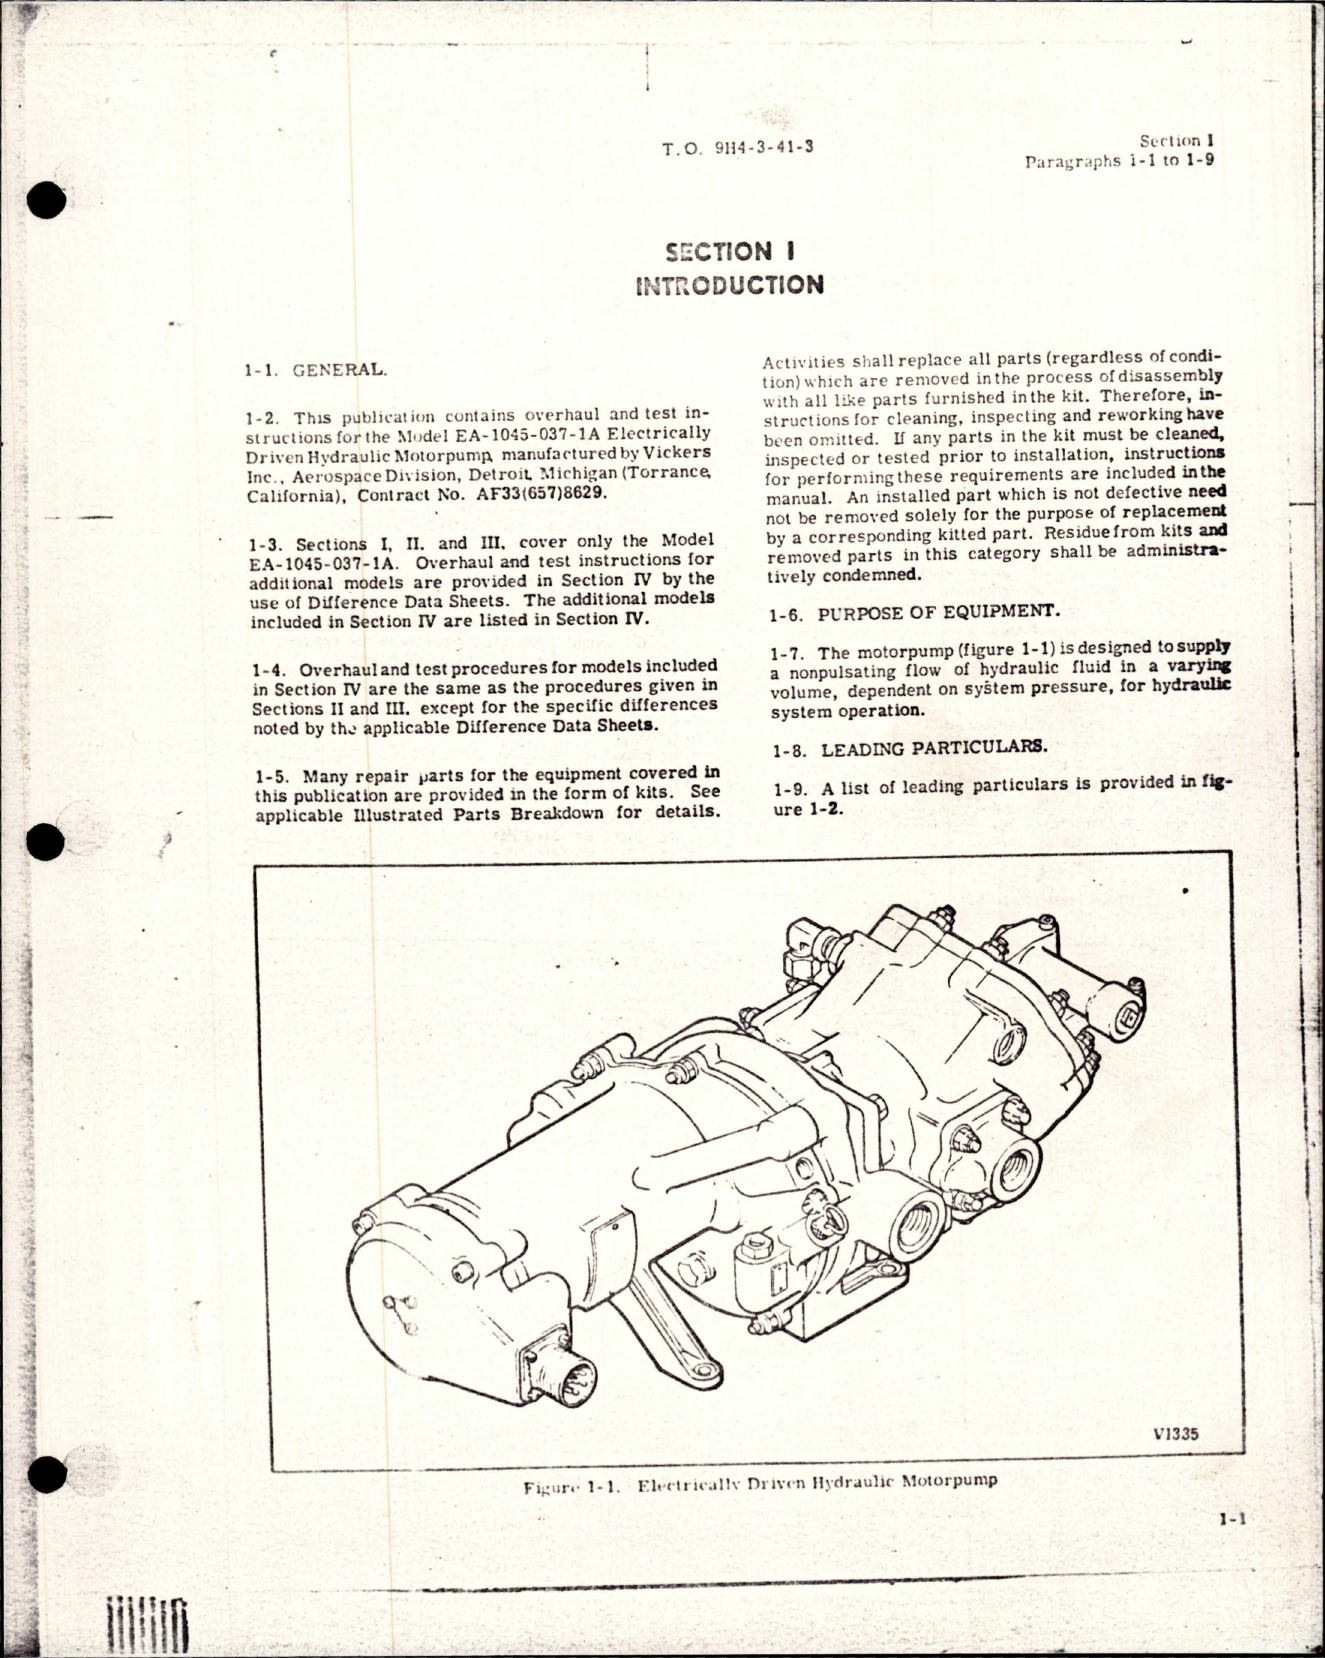 Sample page 5 from AirCorps Library document: Overhaul Instructions for Electrically Driven Hydraulic Motorpump - Change No. 8 